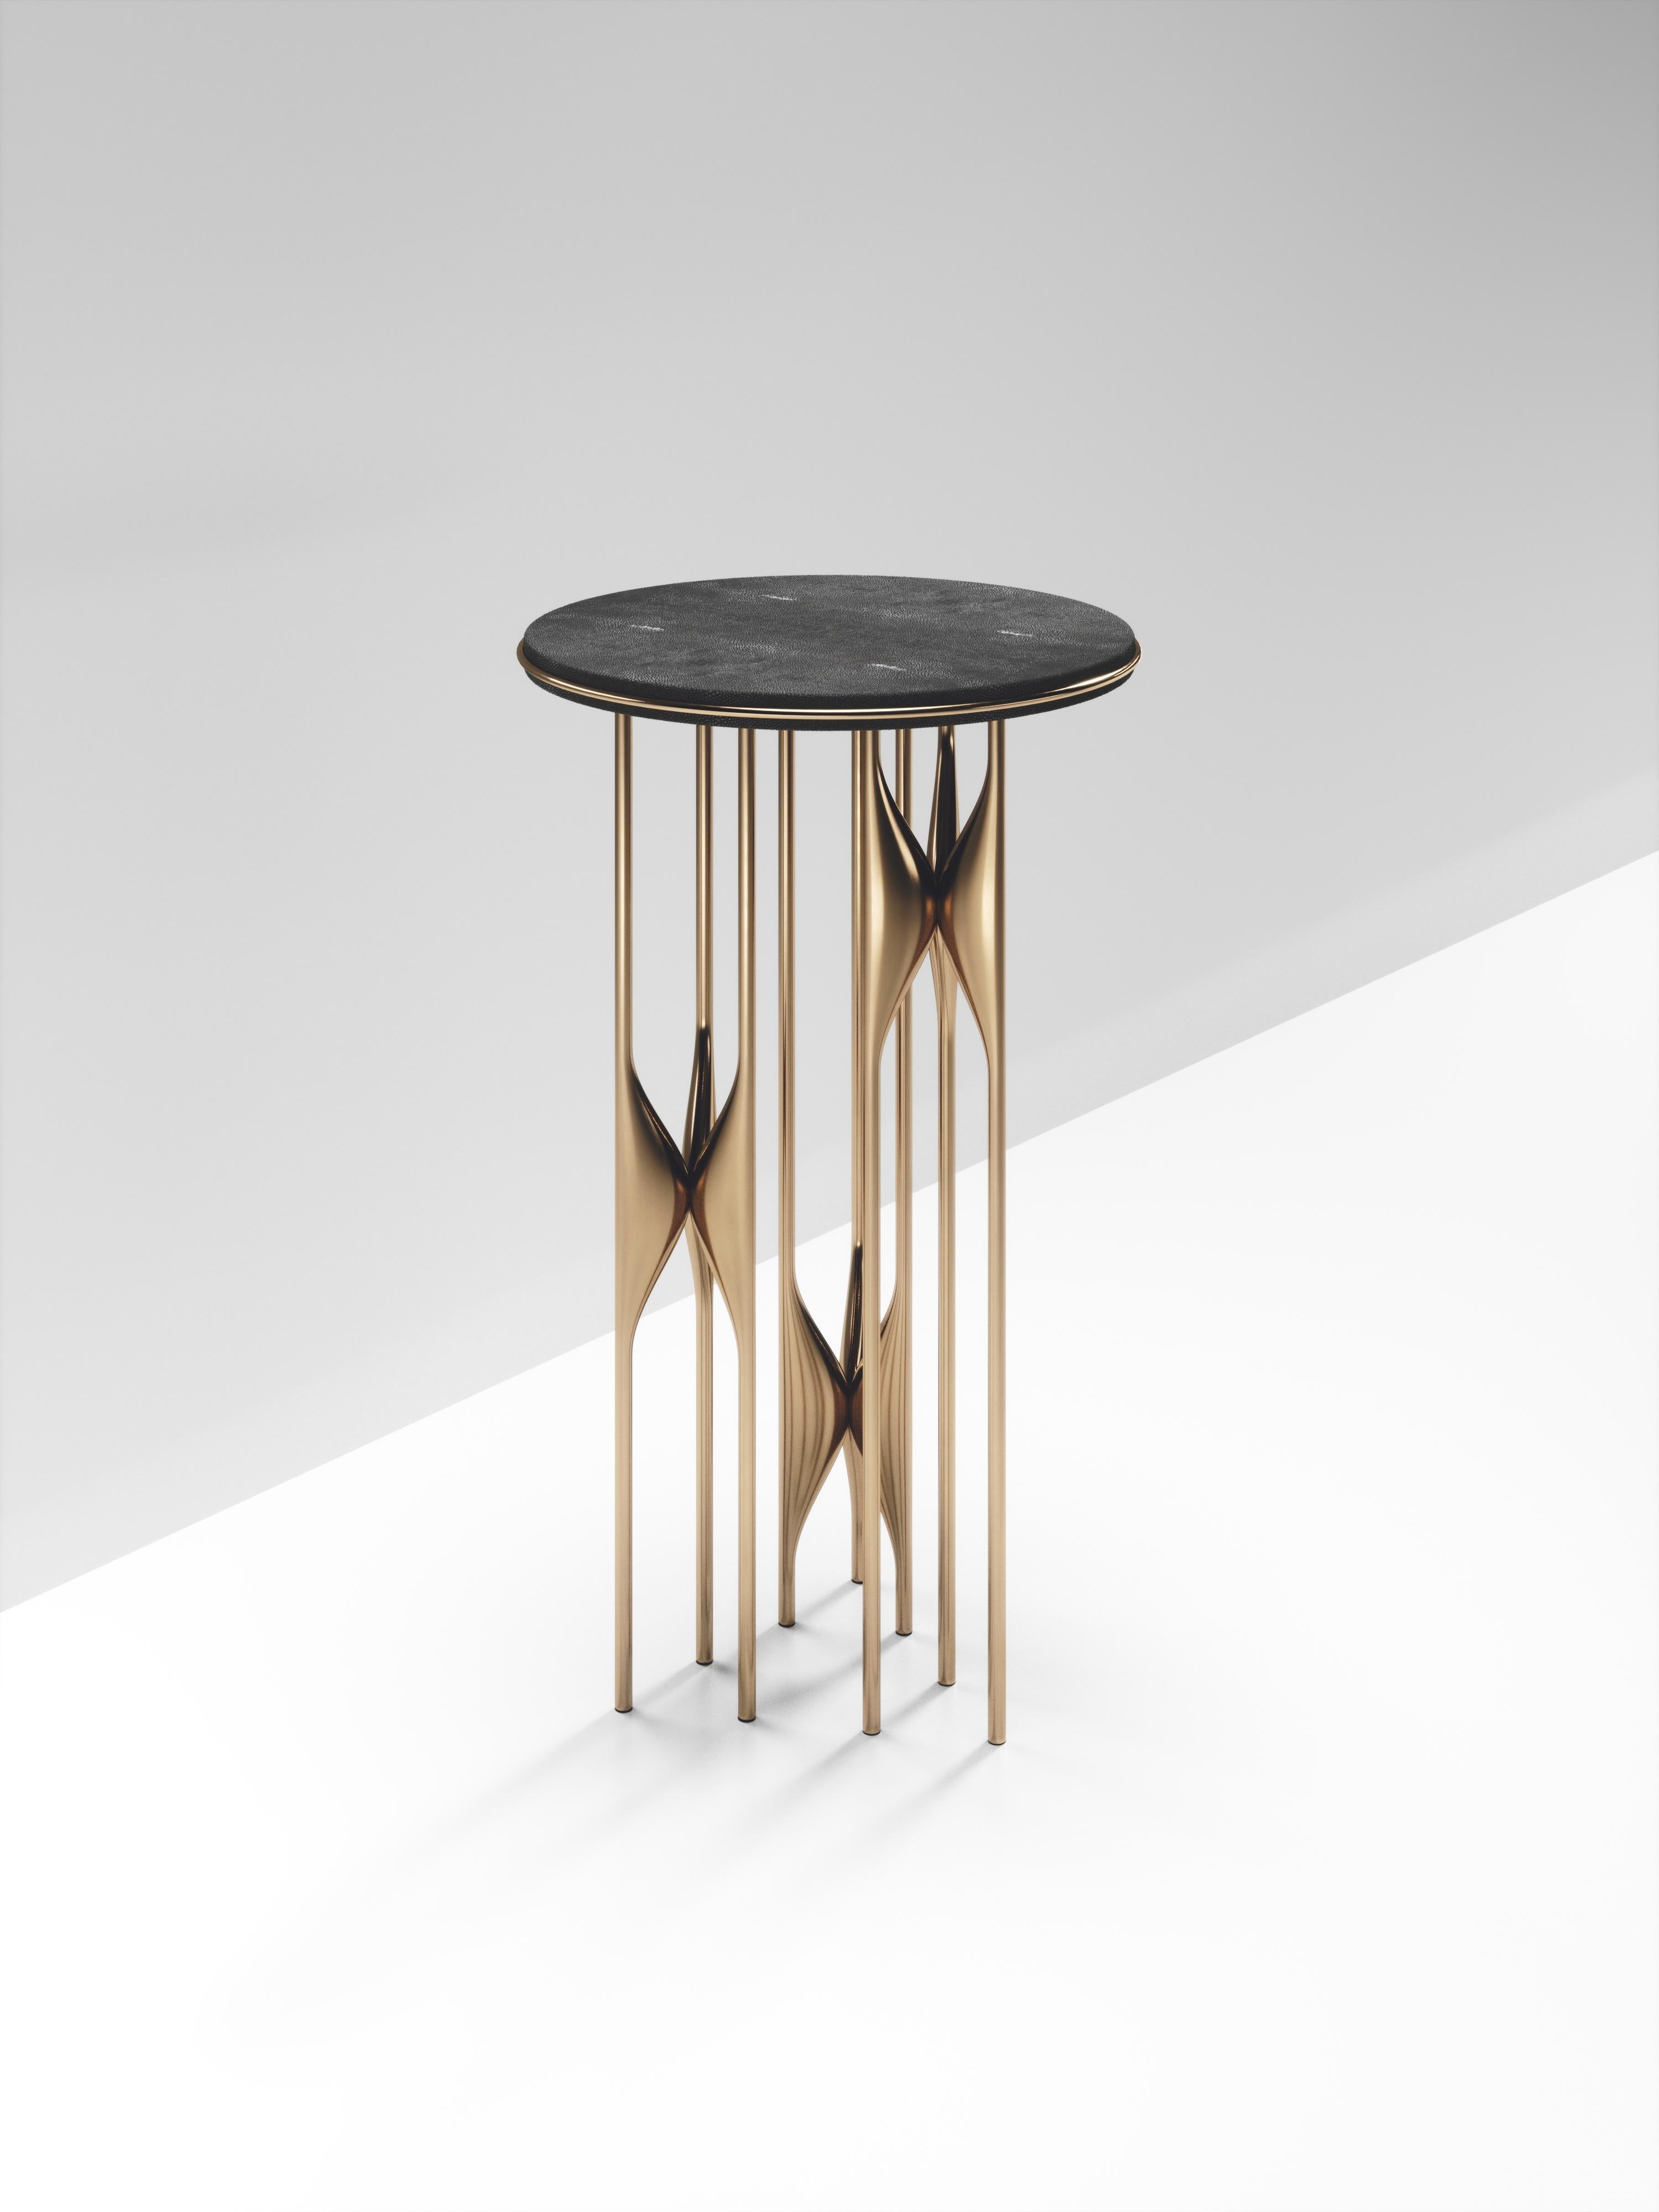 The Plumeria Side Table by Kifu Paris is dramatic and sculptural piece. The coal black shagreen inlaid top sits on clusters of bronze-patina brass legs that are conceptually inspired by bird feathers floating on top of a lake. The border of the top